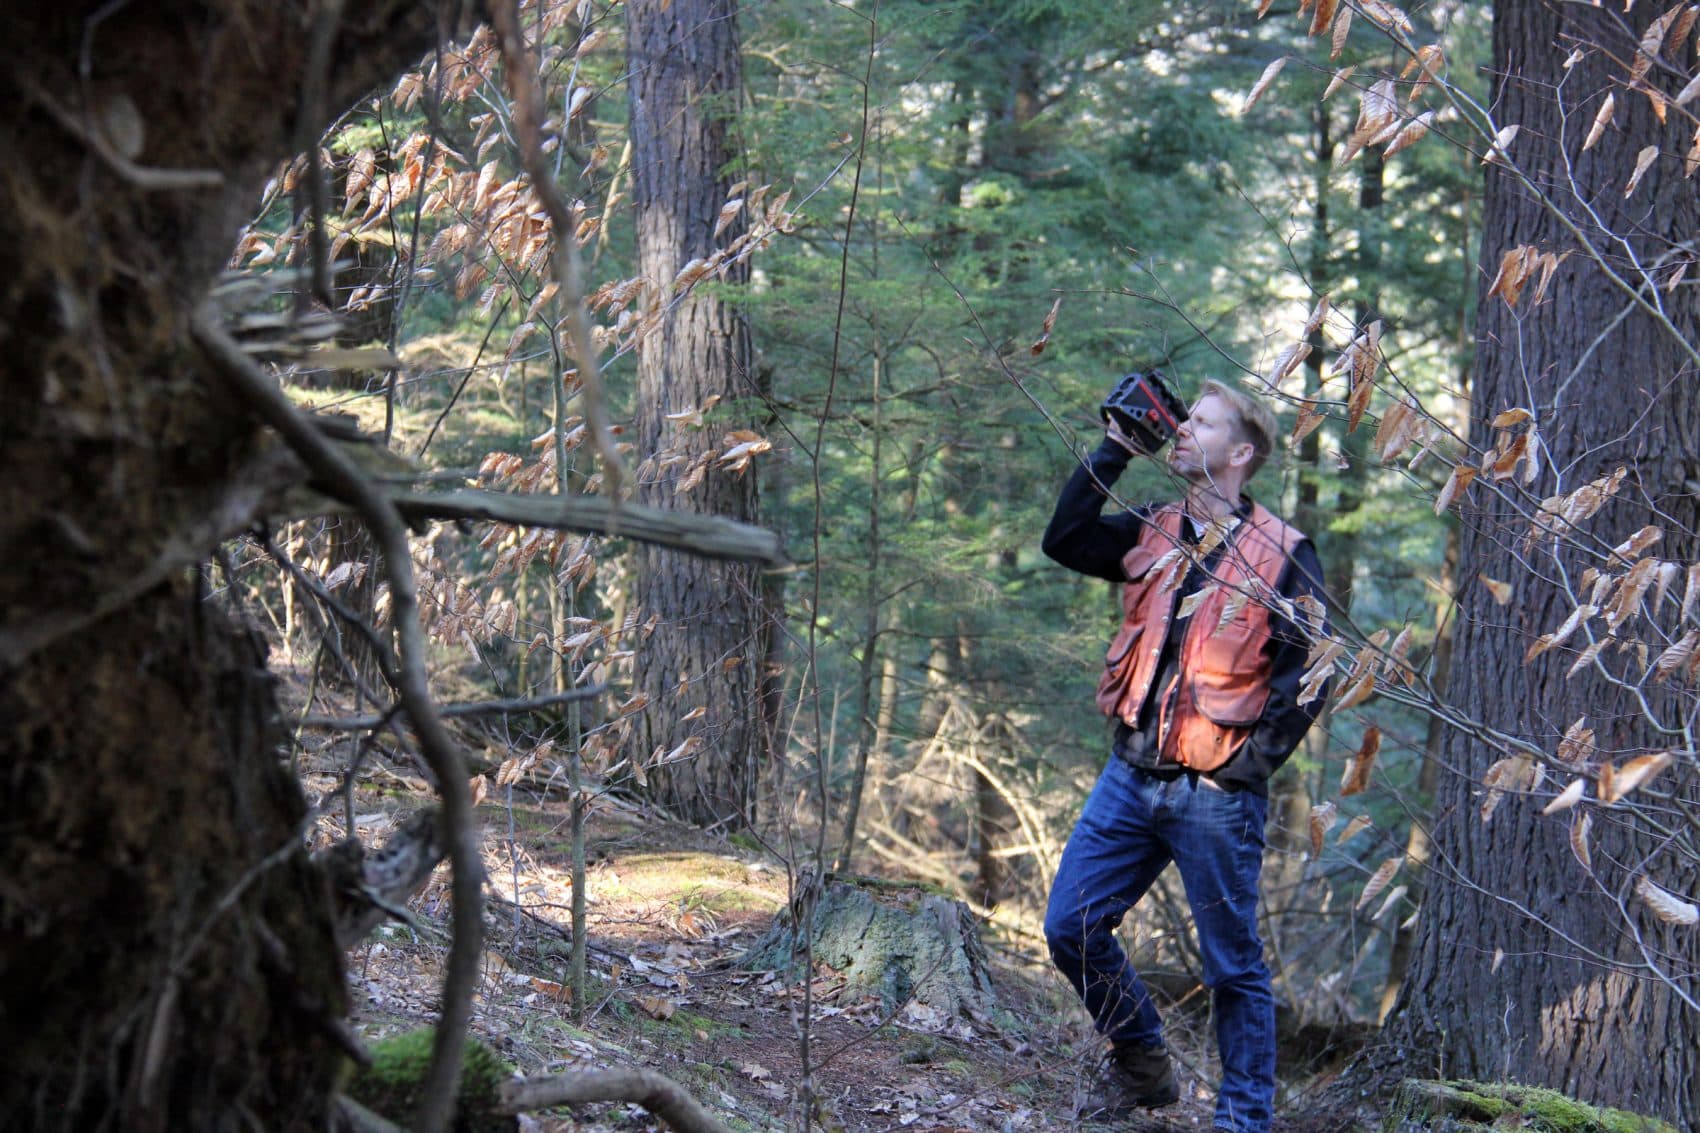 UVM forest ecologist Bill Keeton uses a laser rangefinder to measure the height of a tree in UVM's Jericho Research Forest. (Courtesy Kathleen Masterson/VPR)